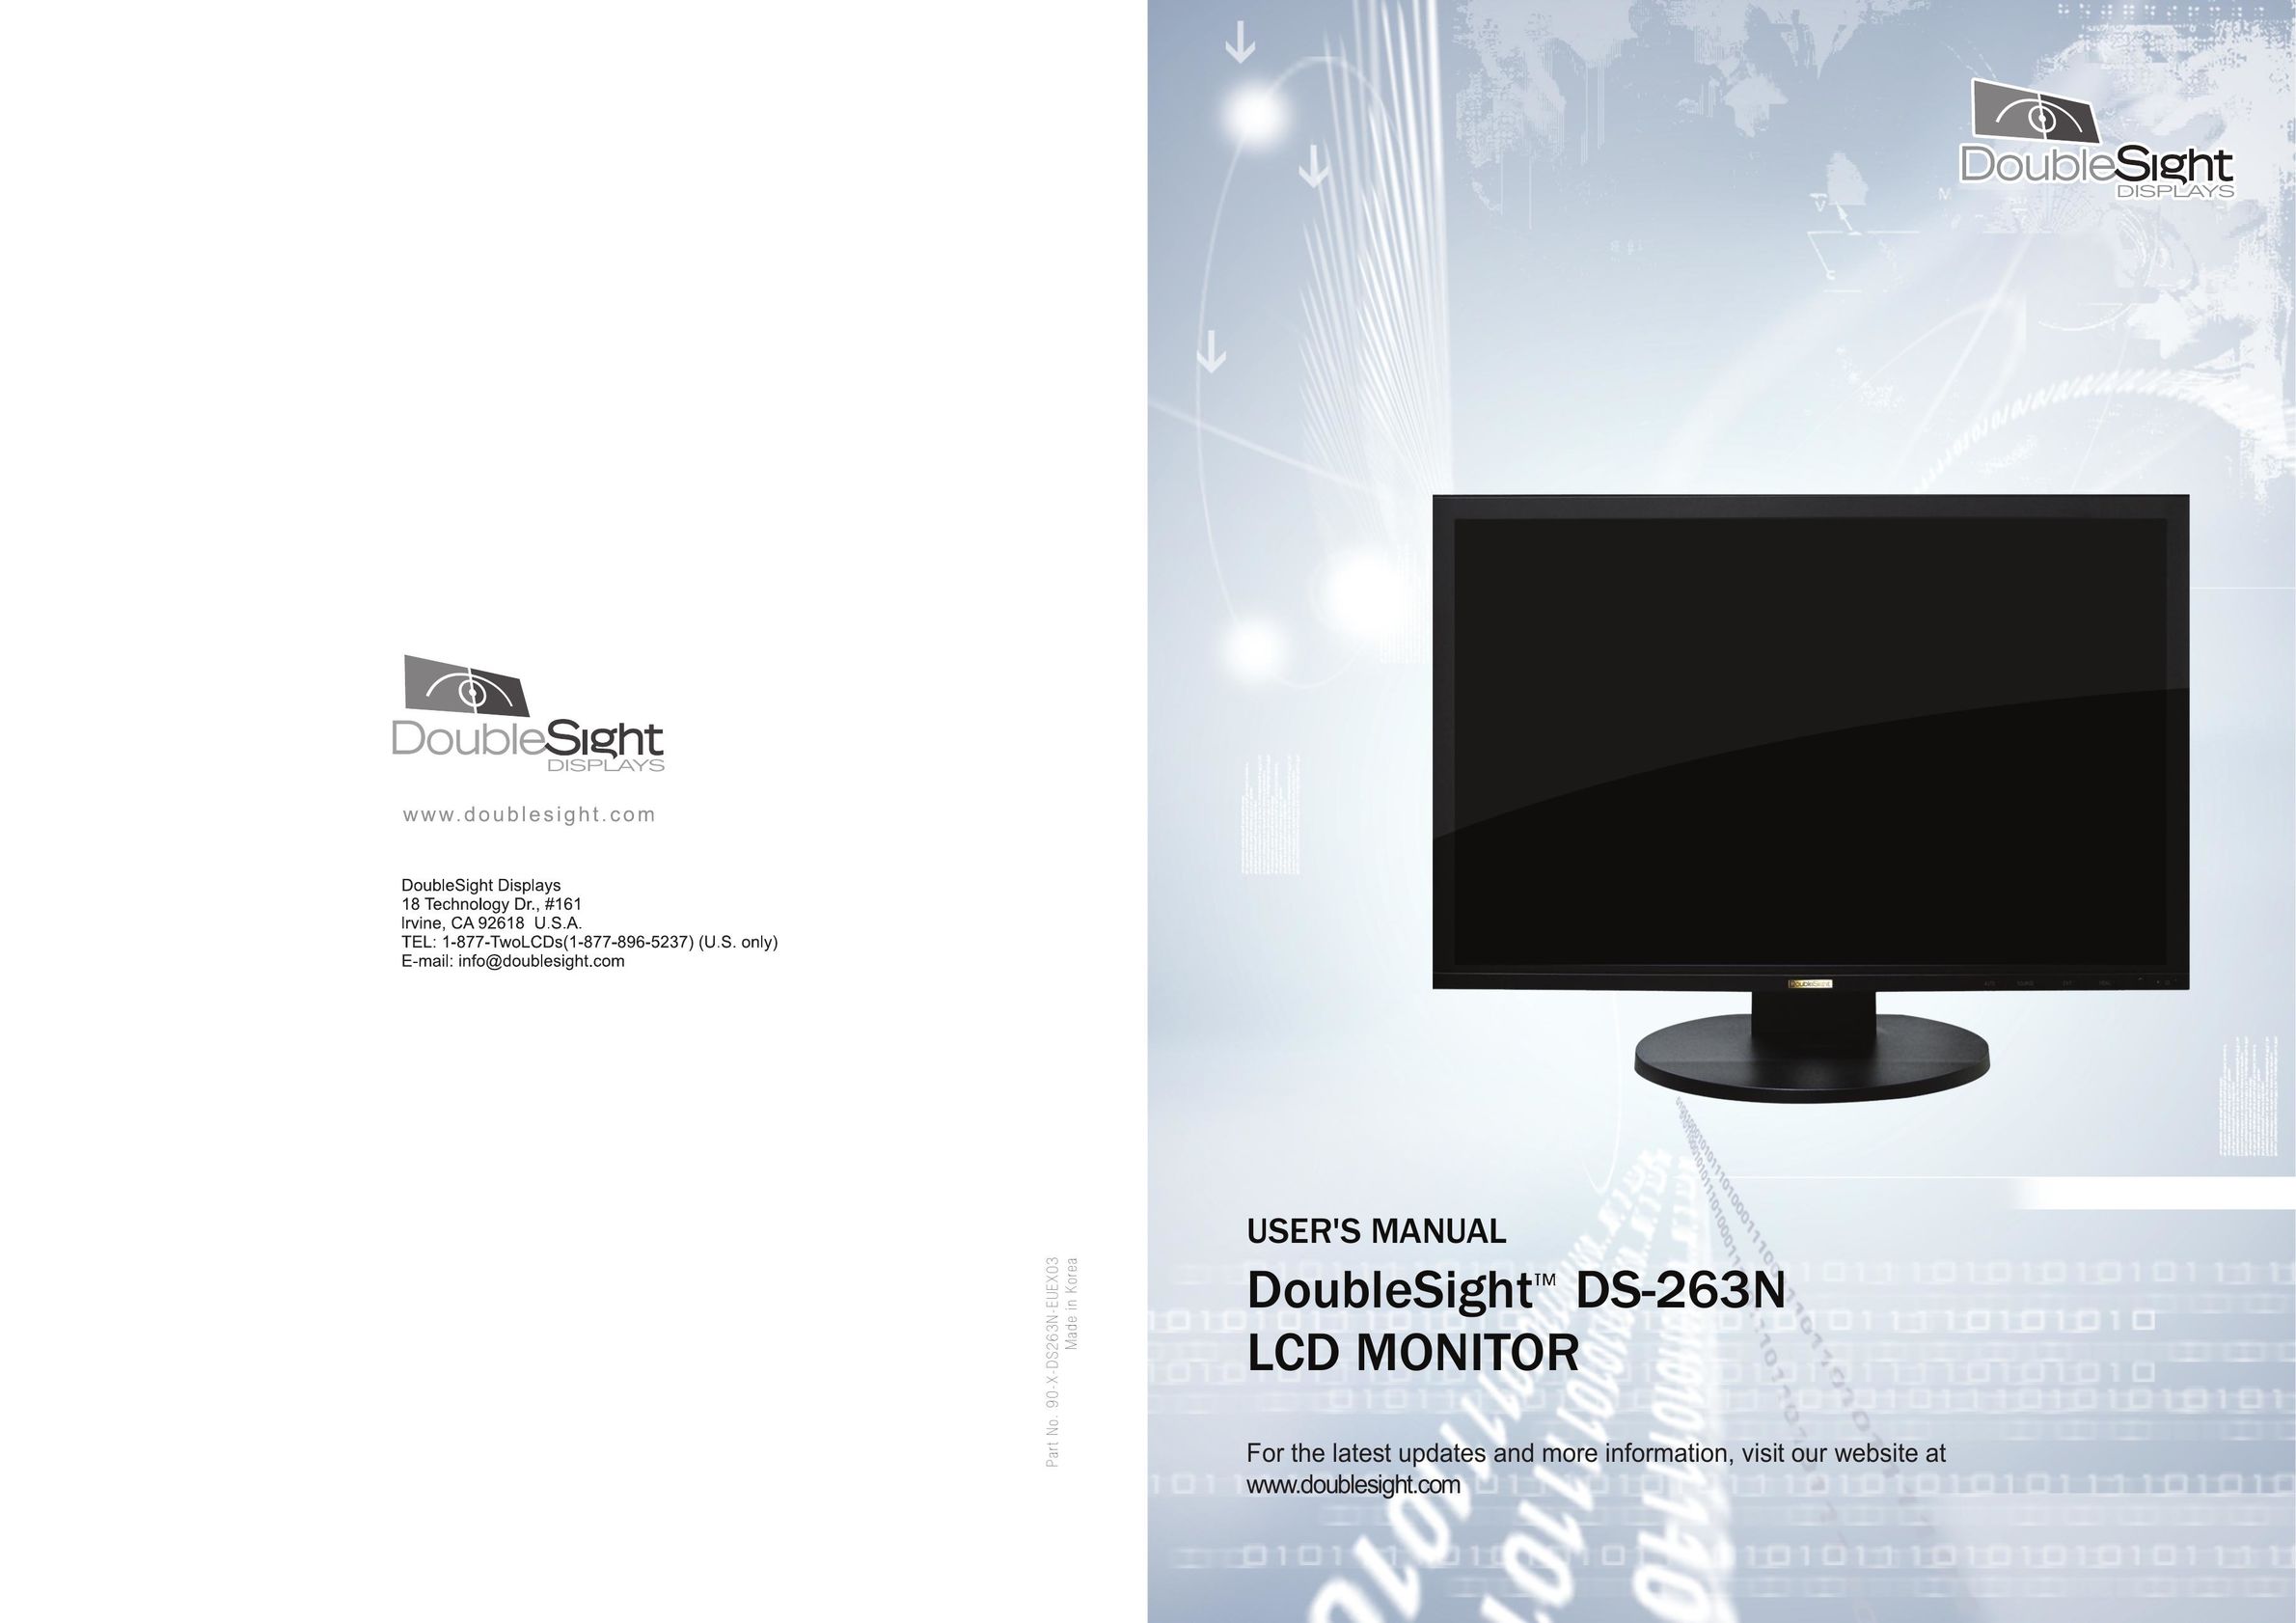 DoubleSight Displays DS-263N Computer Monitor User Manual